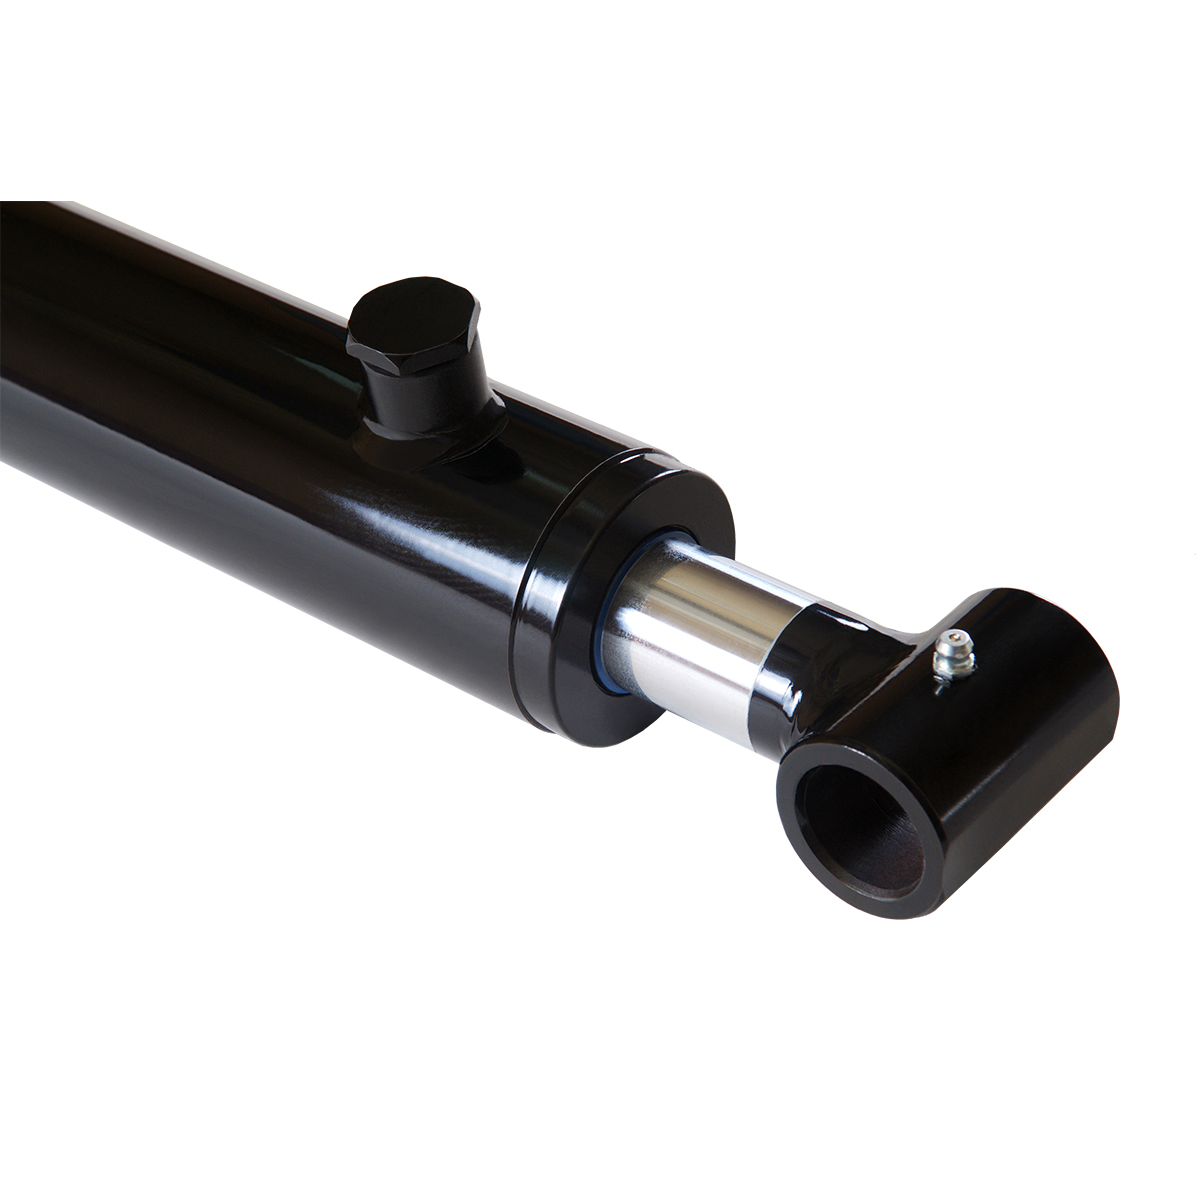 2 bore x 32 stroke hydraulic cylinder, welded cross tube double acting cylinder | Magister Hydraulics